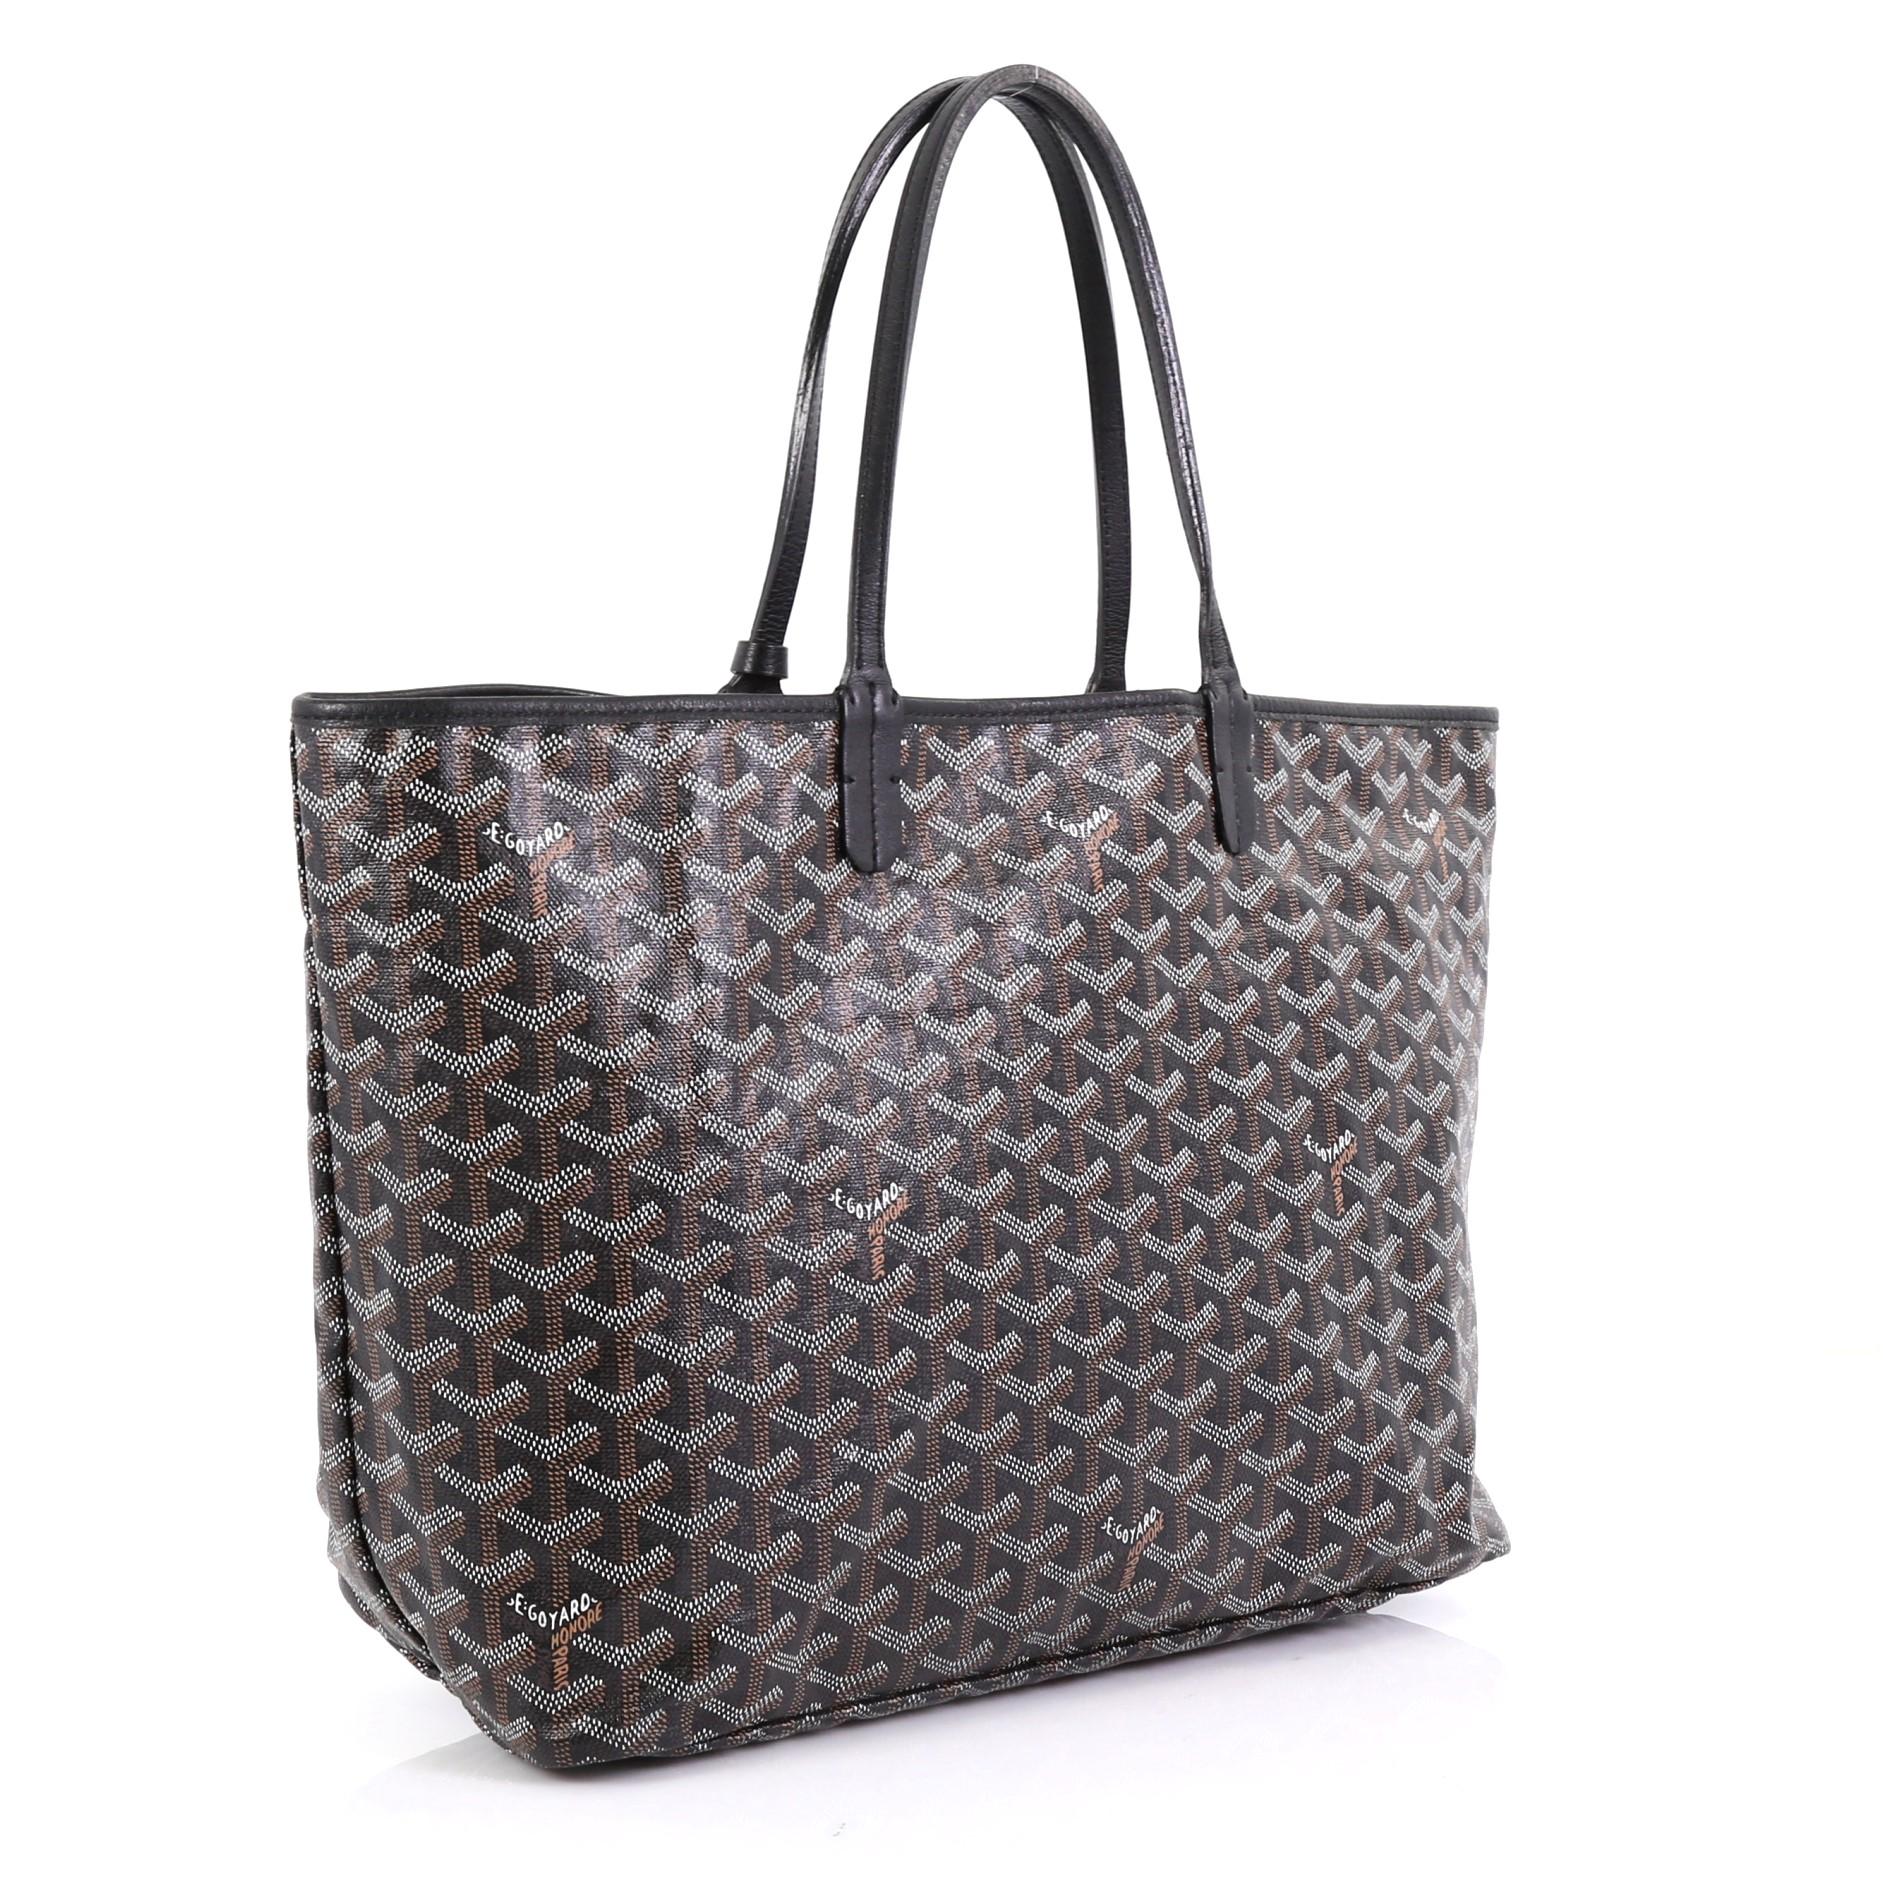 how much is a goyard tote bag